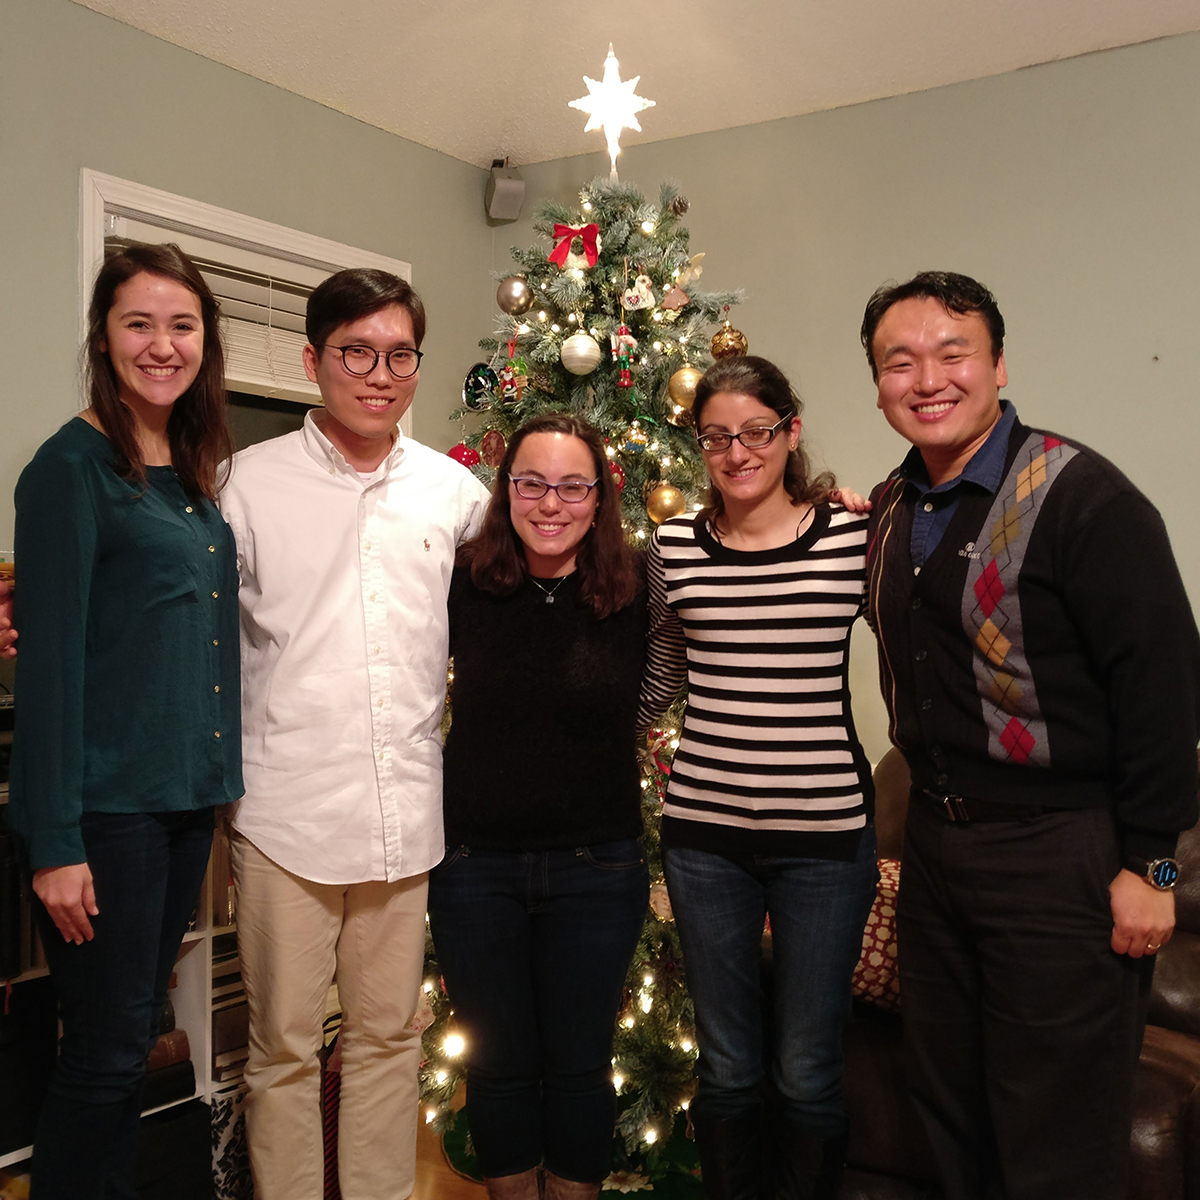 Four students and a male professor standing in front of a Christmas tree